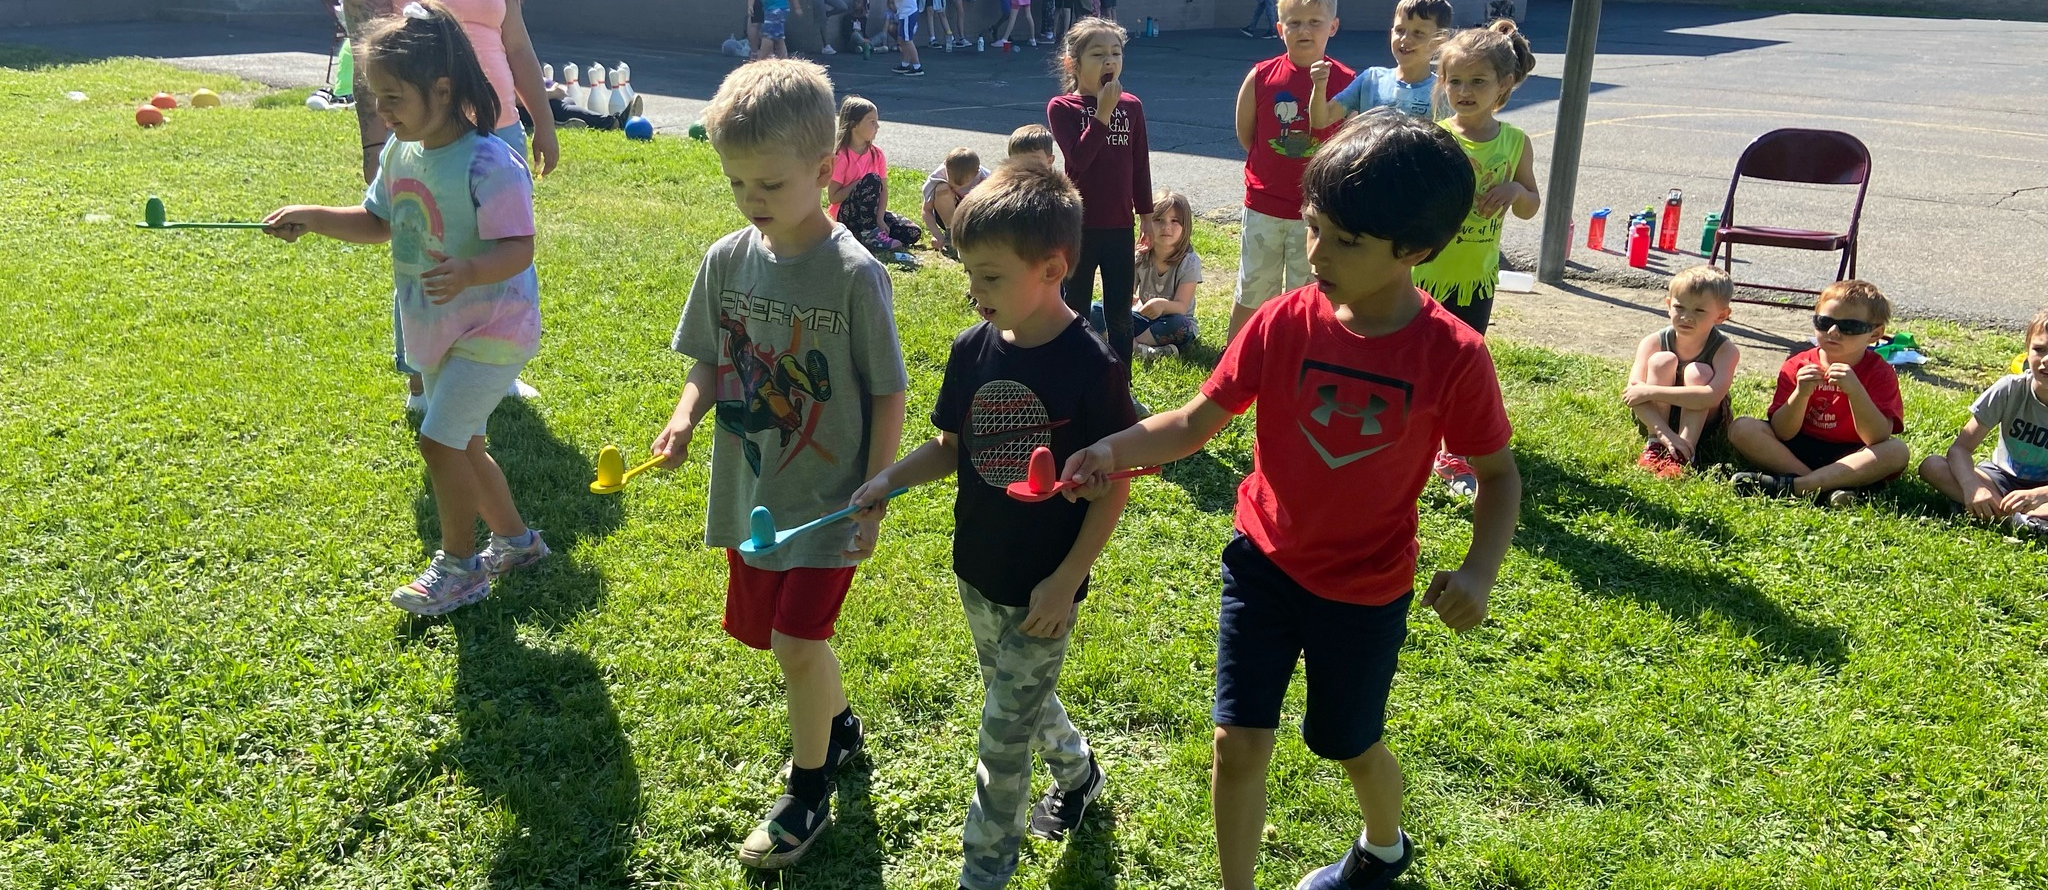 Taylor Parks Field Day